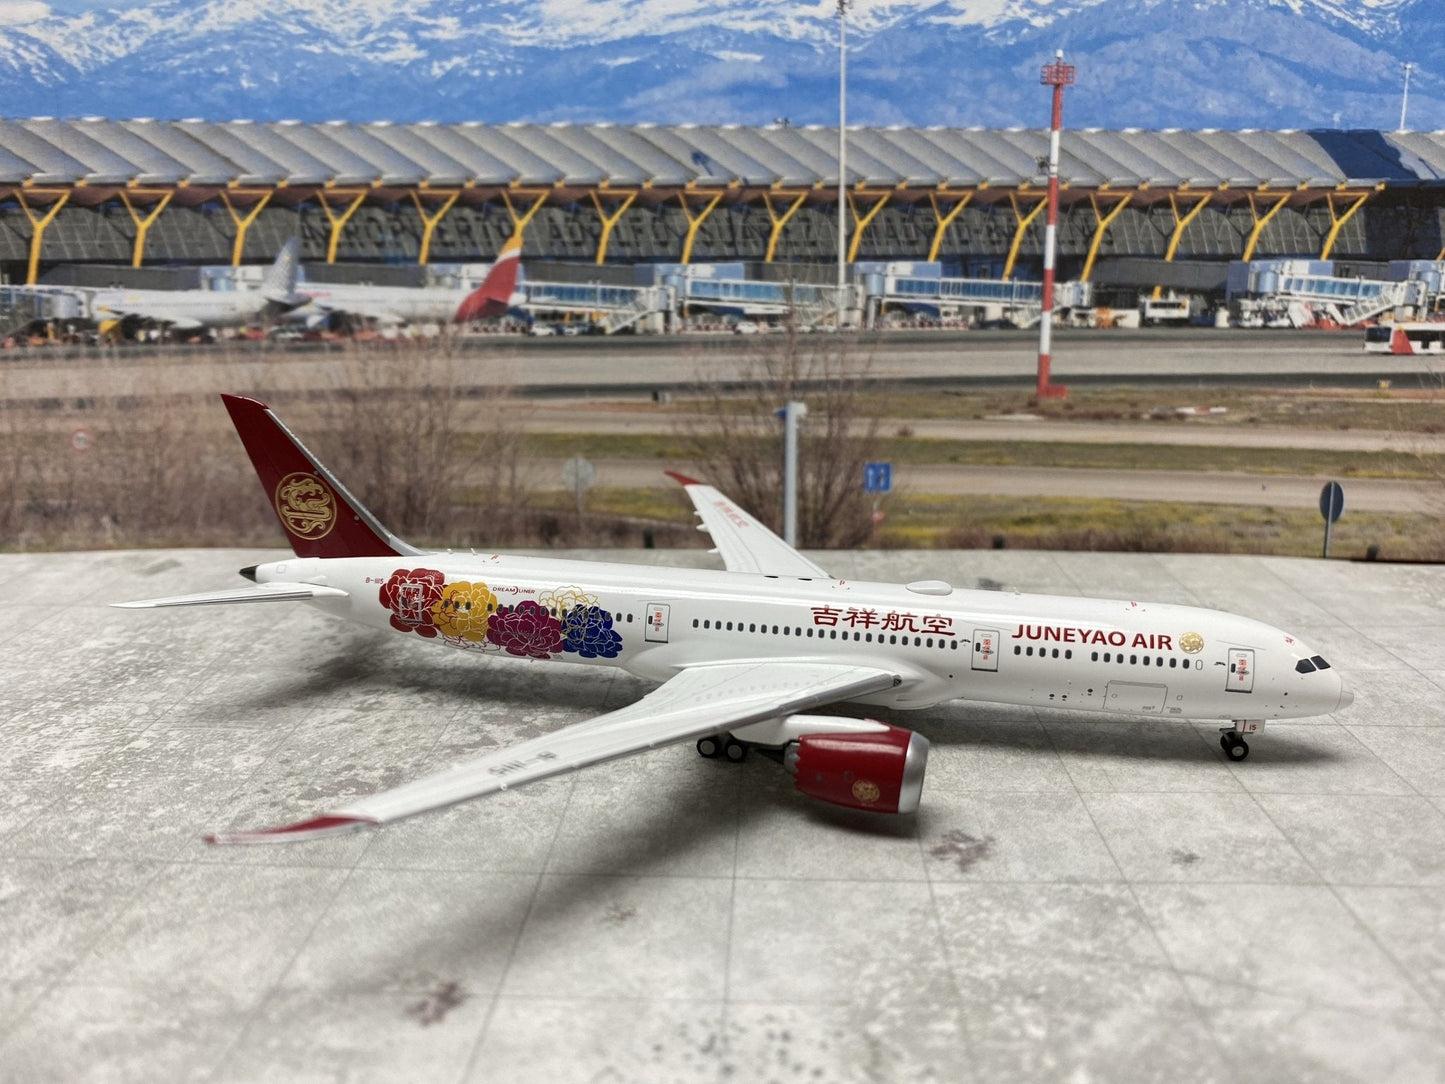 1/400 Juneyao Airlines B 787-9 "Flower" NG Models 55007 - Midwest Model Store